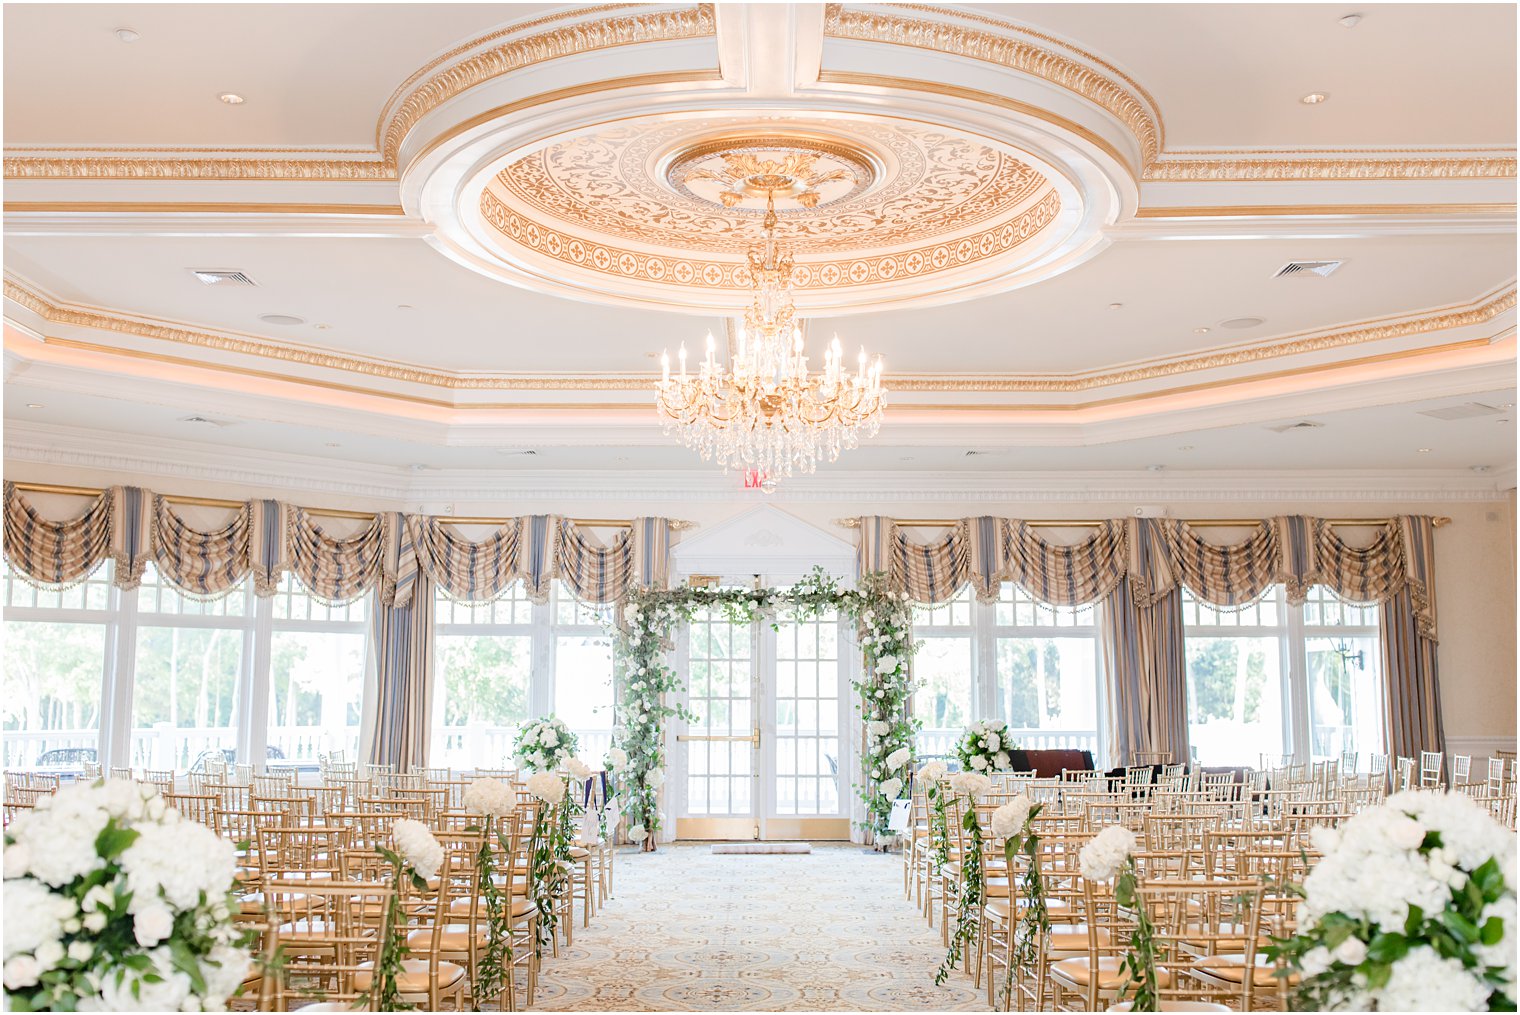 Eagle Oaks Golf and Country Club wedding ceremony with white floral decor